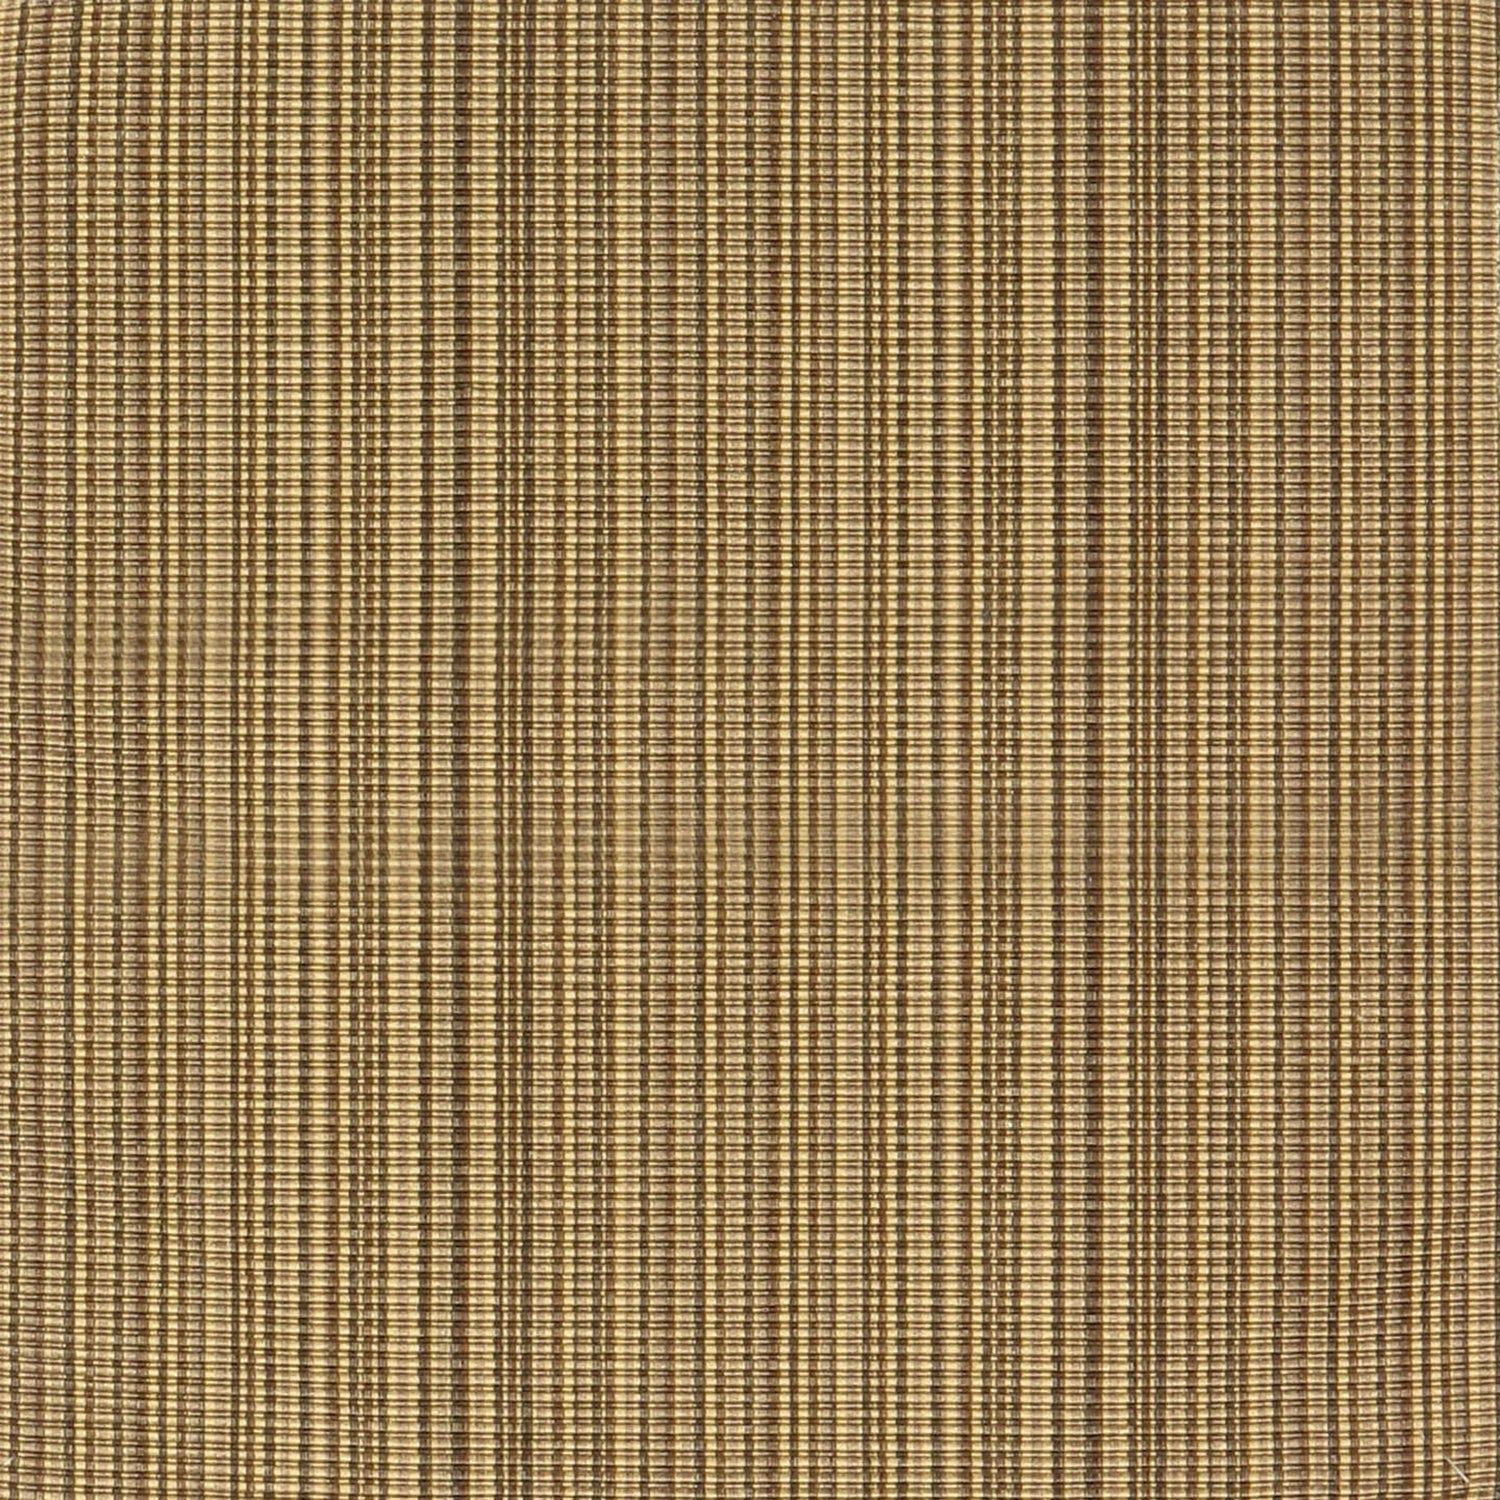 Malta Strie fabric in raffia color - pattern number AI 16471992 - by Scalamandre in the Old World Weavers collection